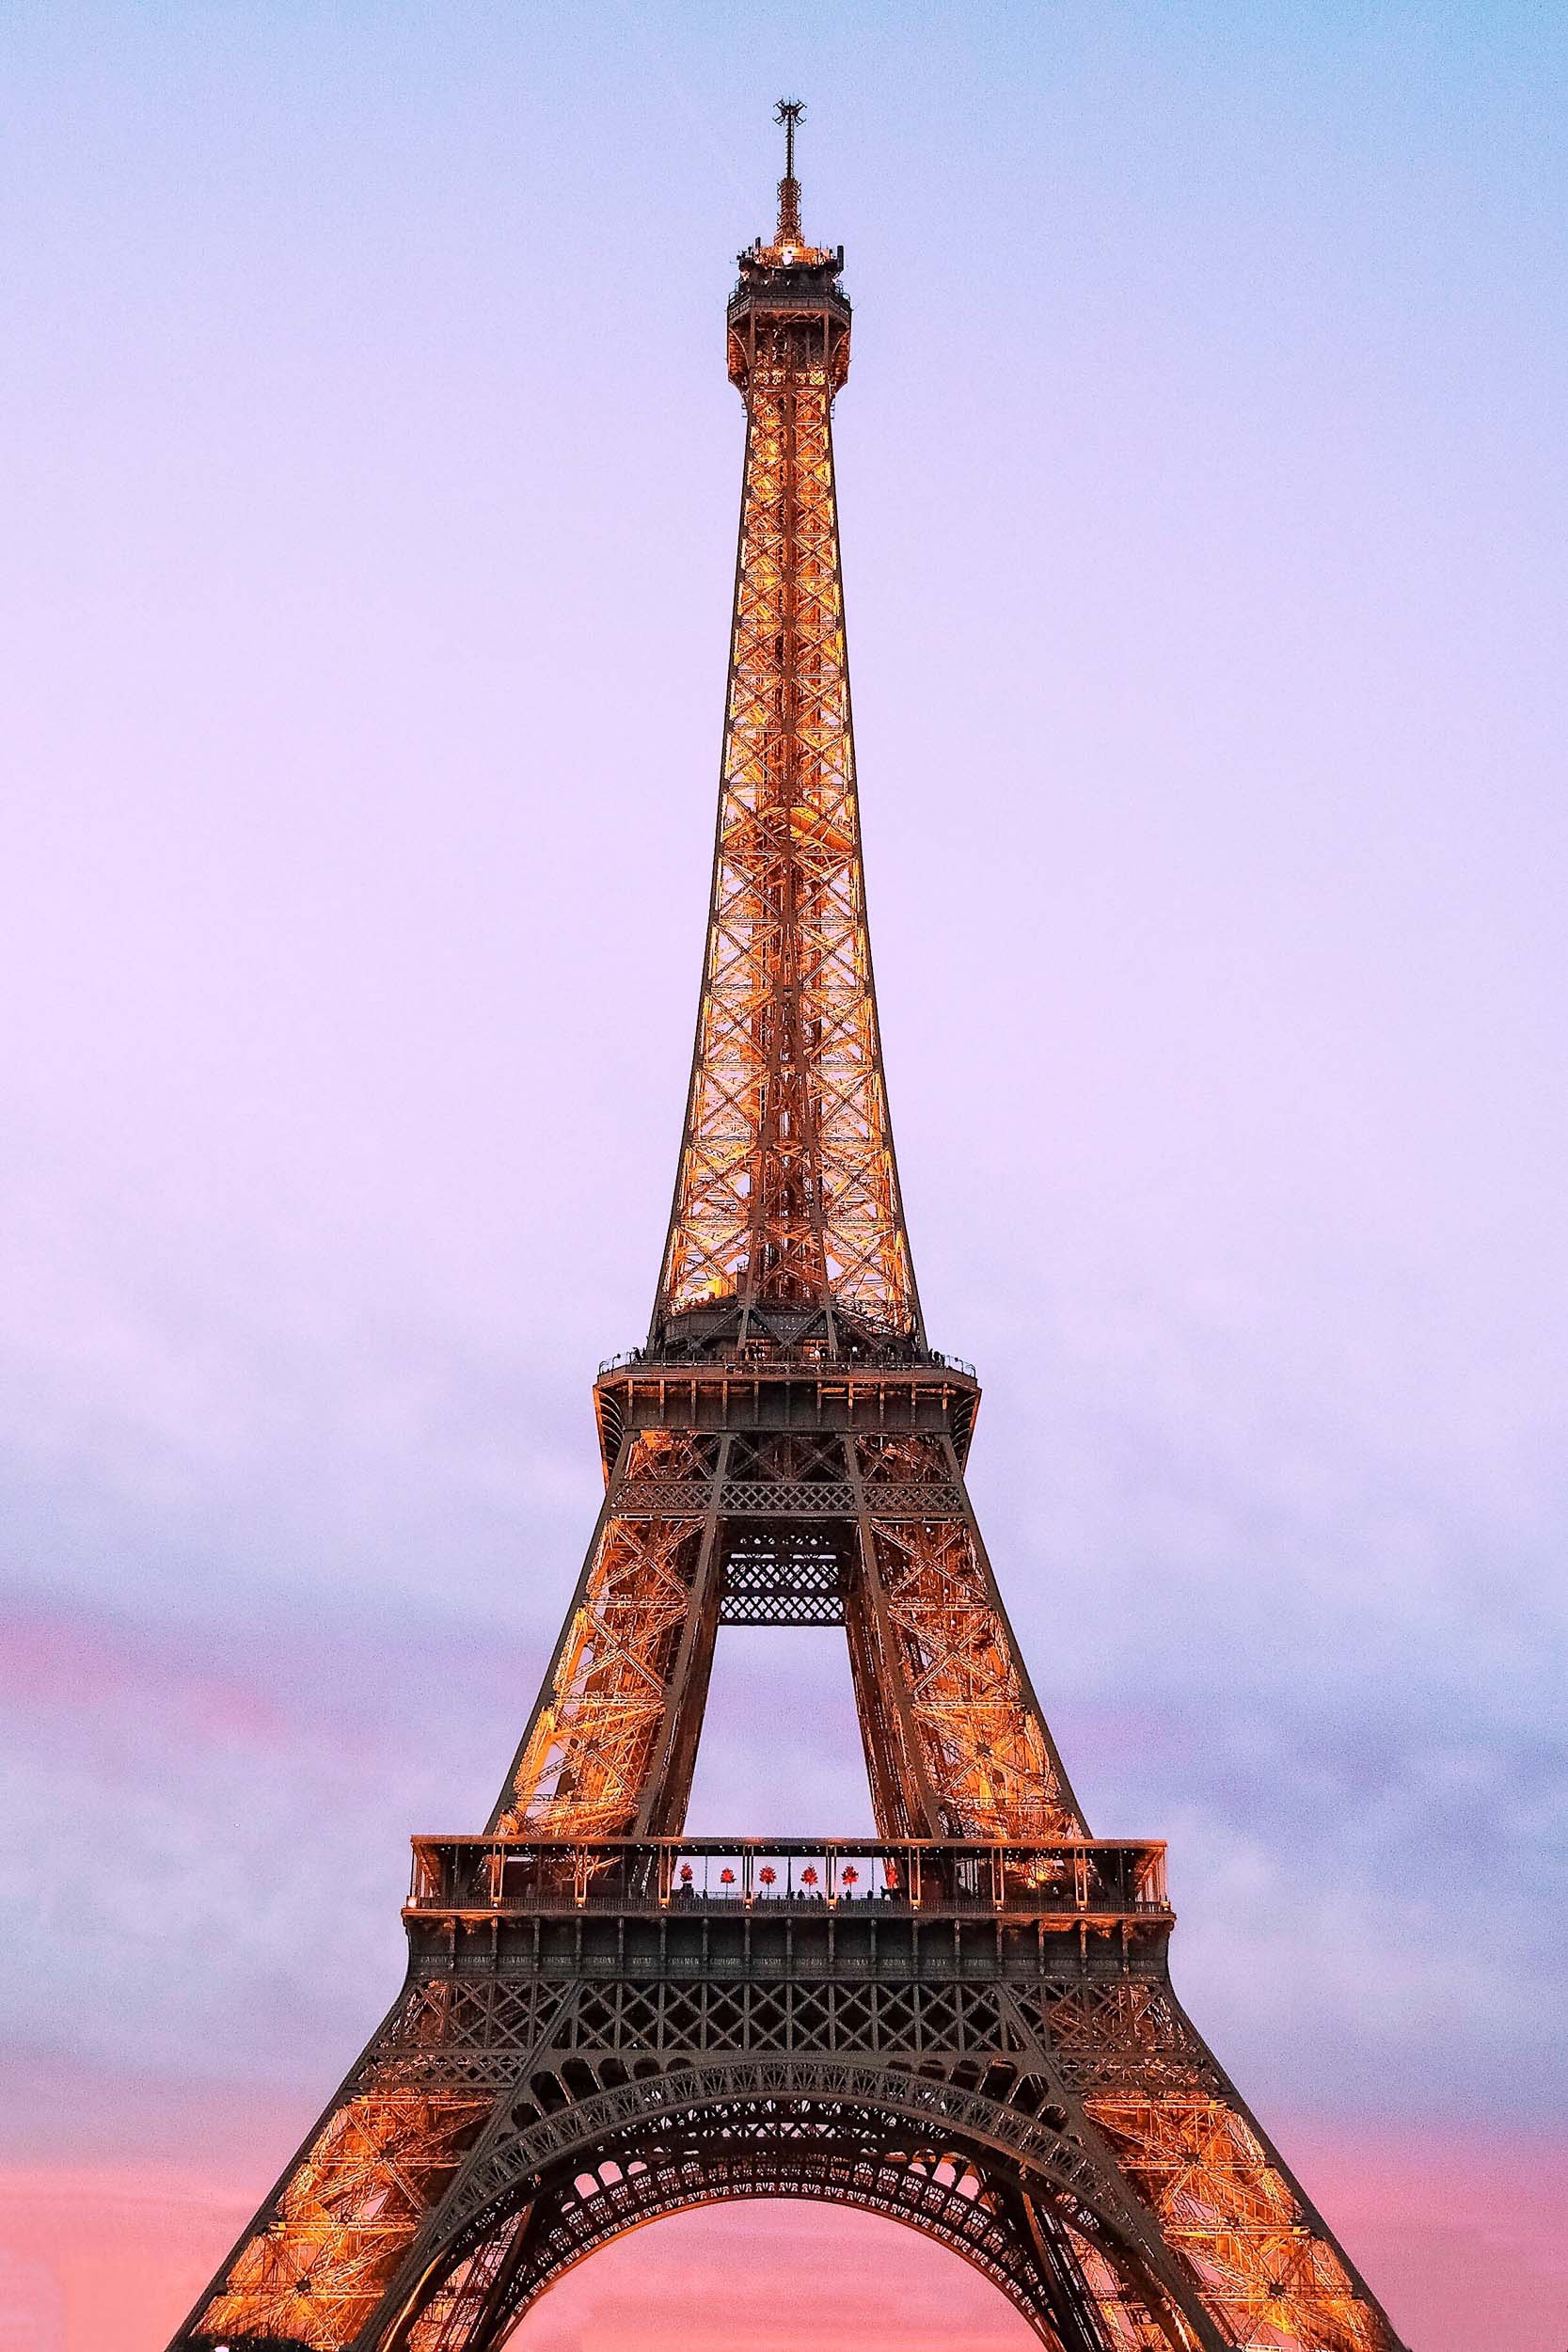 A colorful sunset at the Eiffel Tower in Paris in December